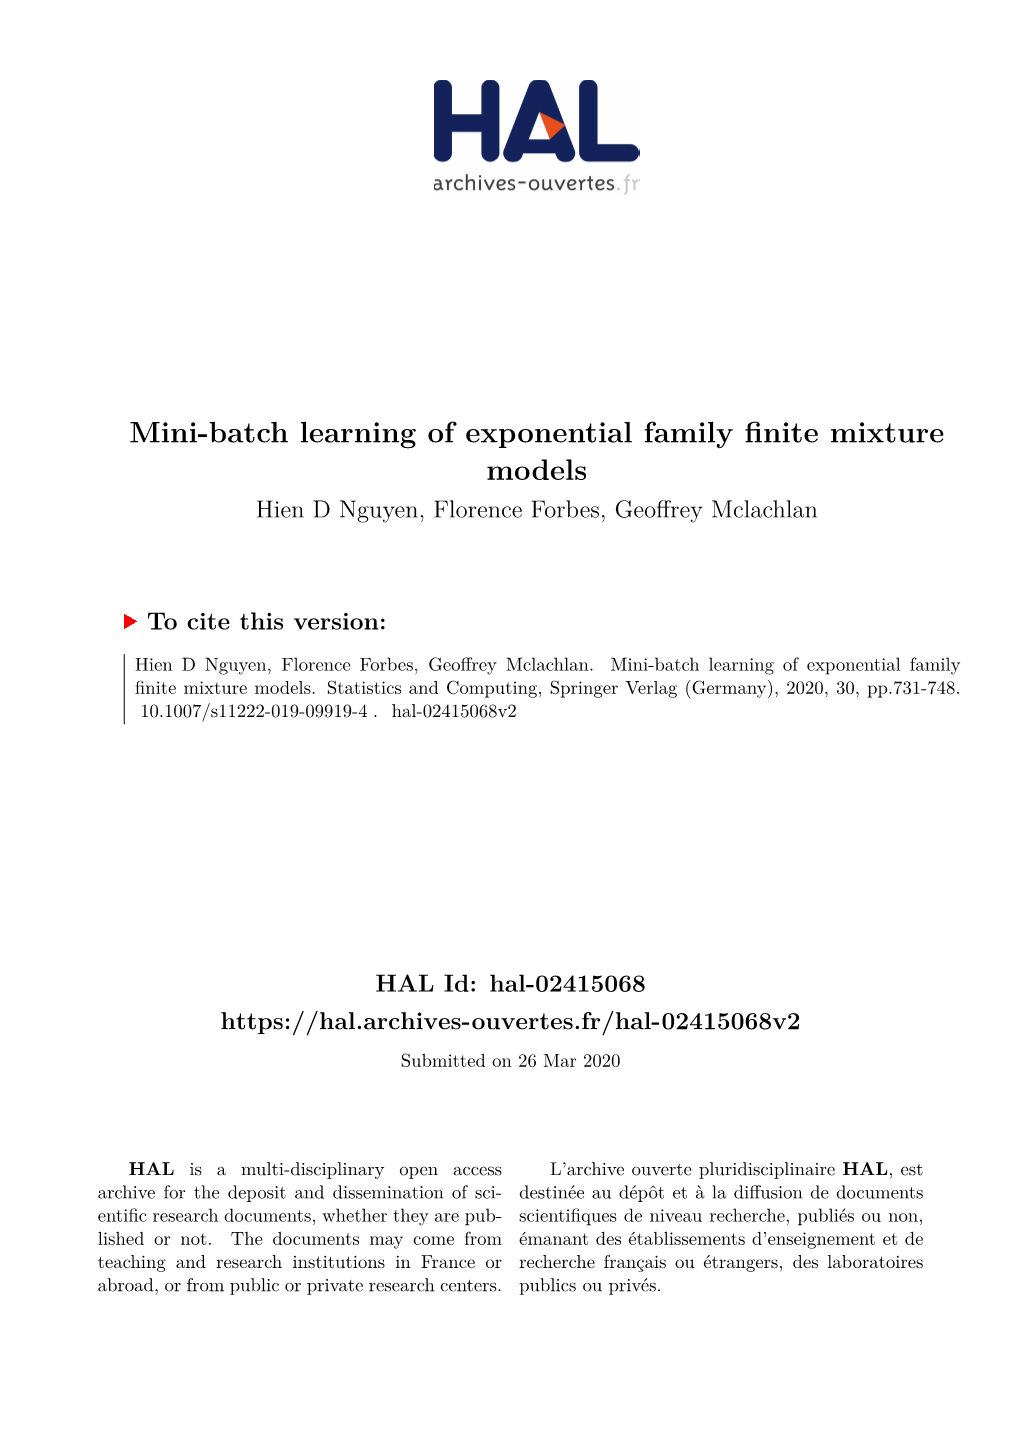 Mini-Batch Learning of Exponential Family Finite Mixture Models Hien D Nguyen, Florence Forbes, Geoffrey Mclachlan